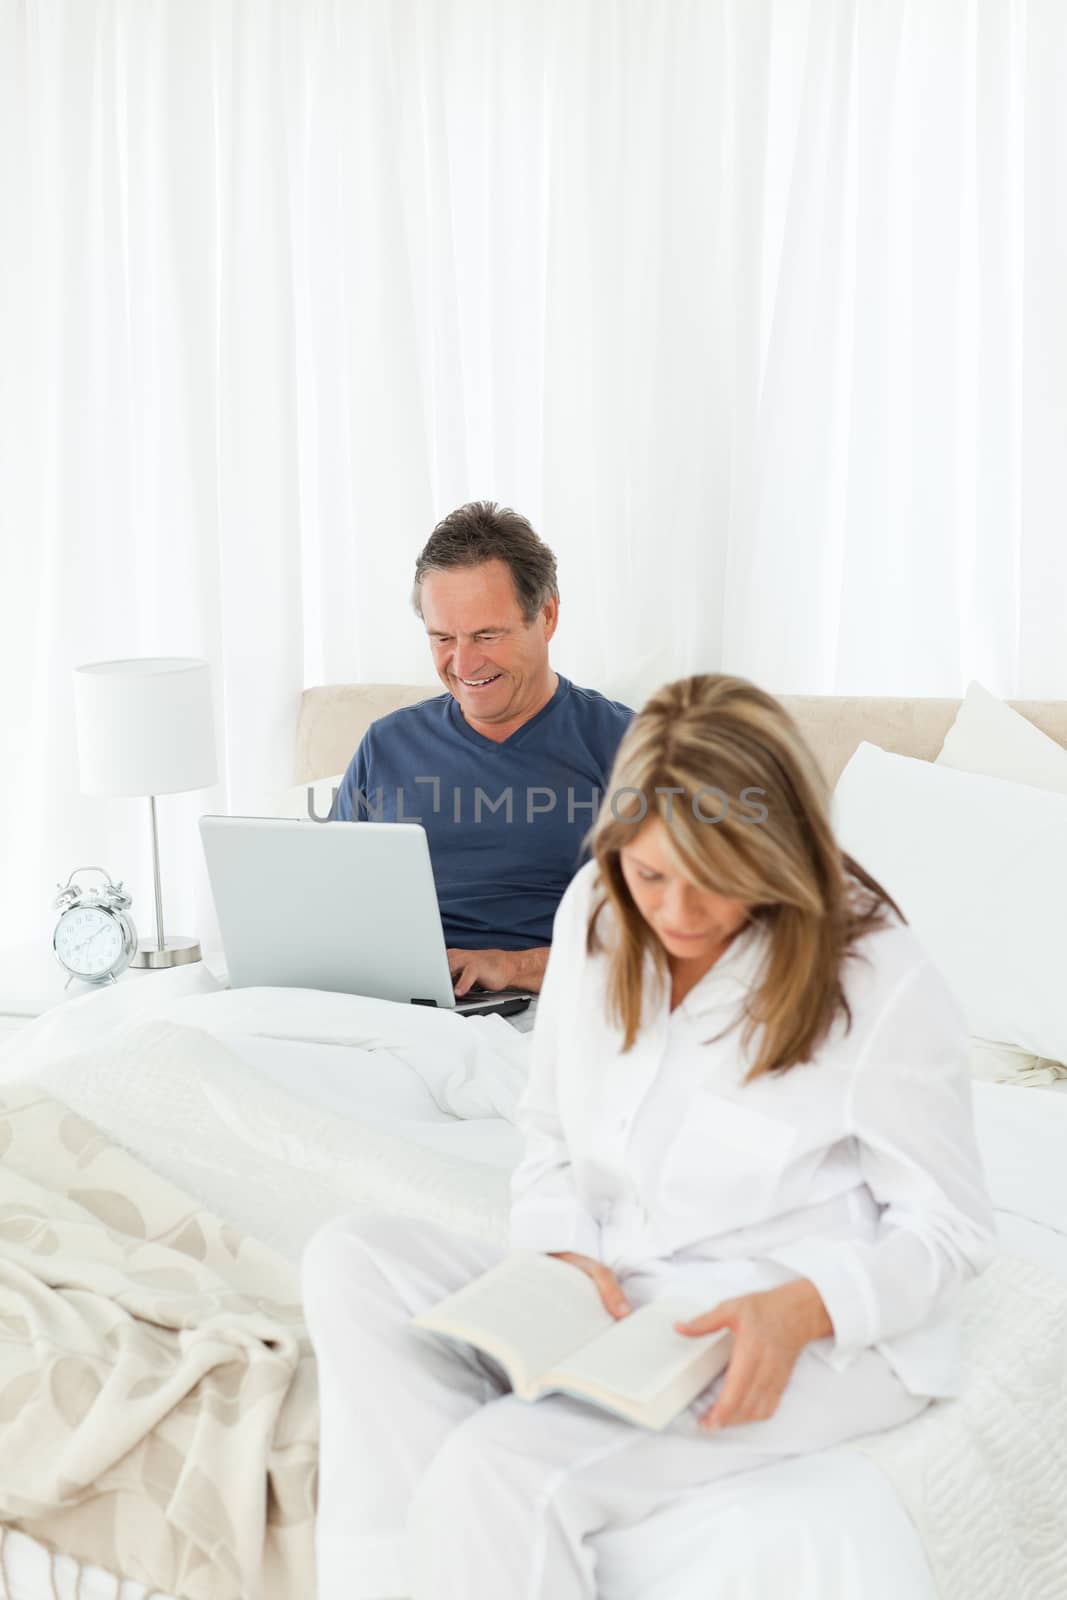 Senior looking at his laptop while her wife is reading at home